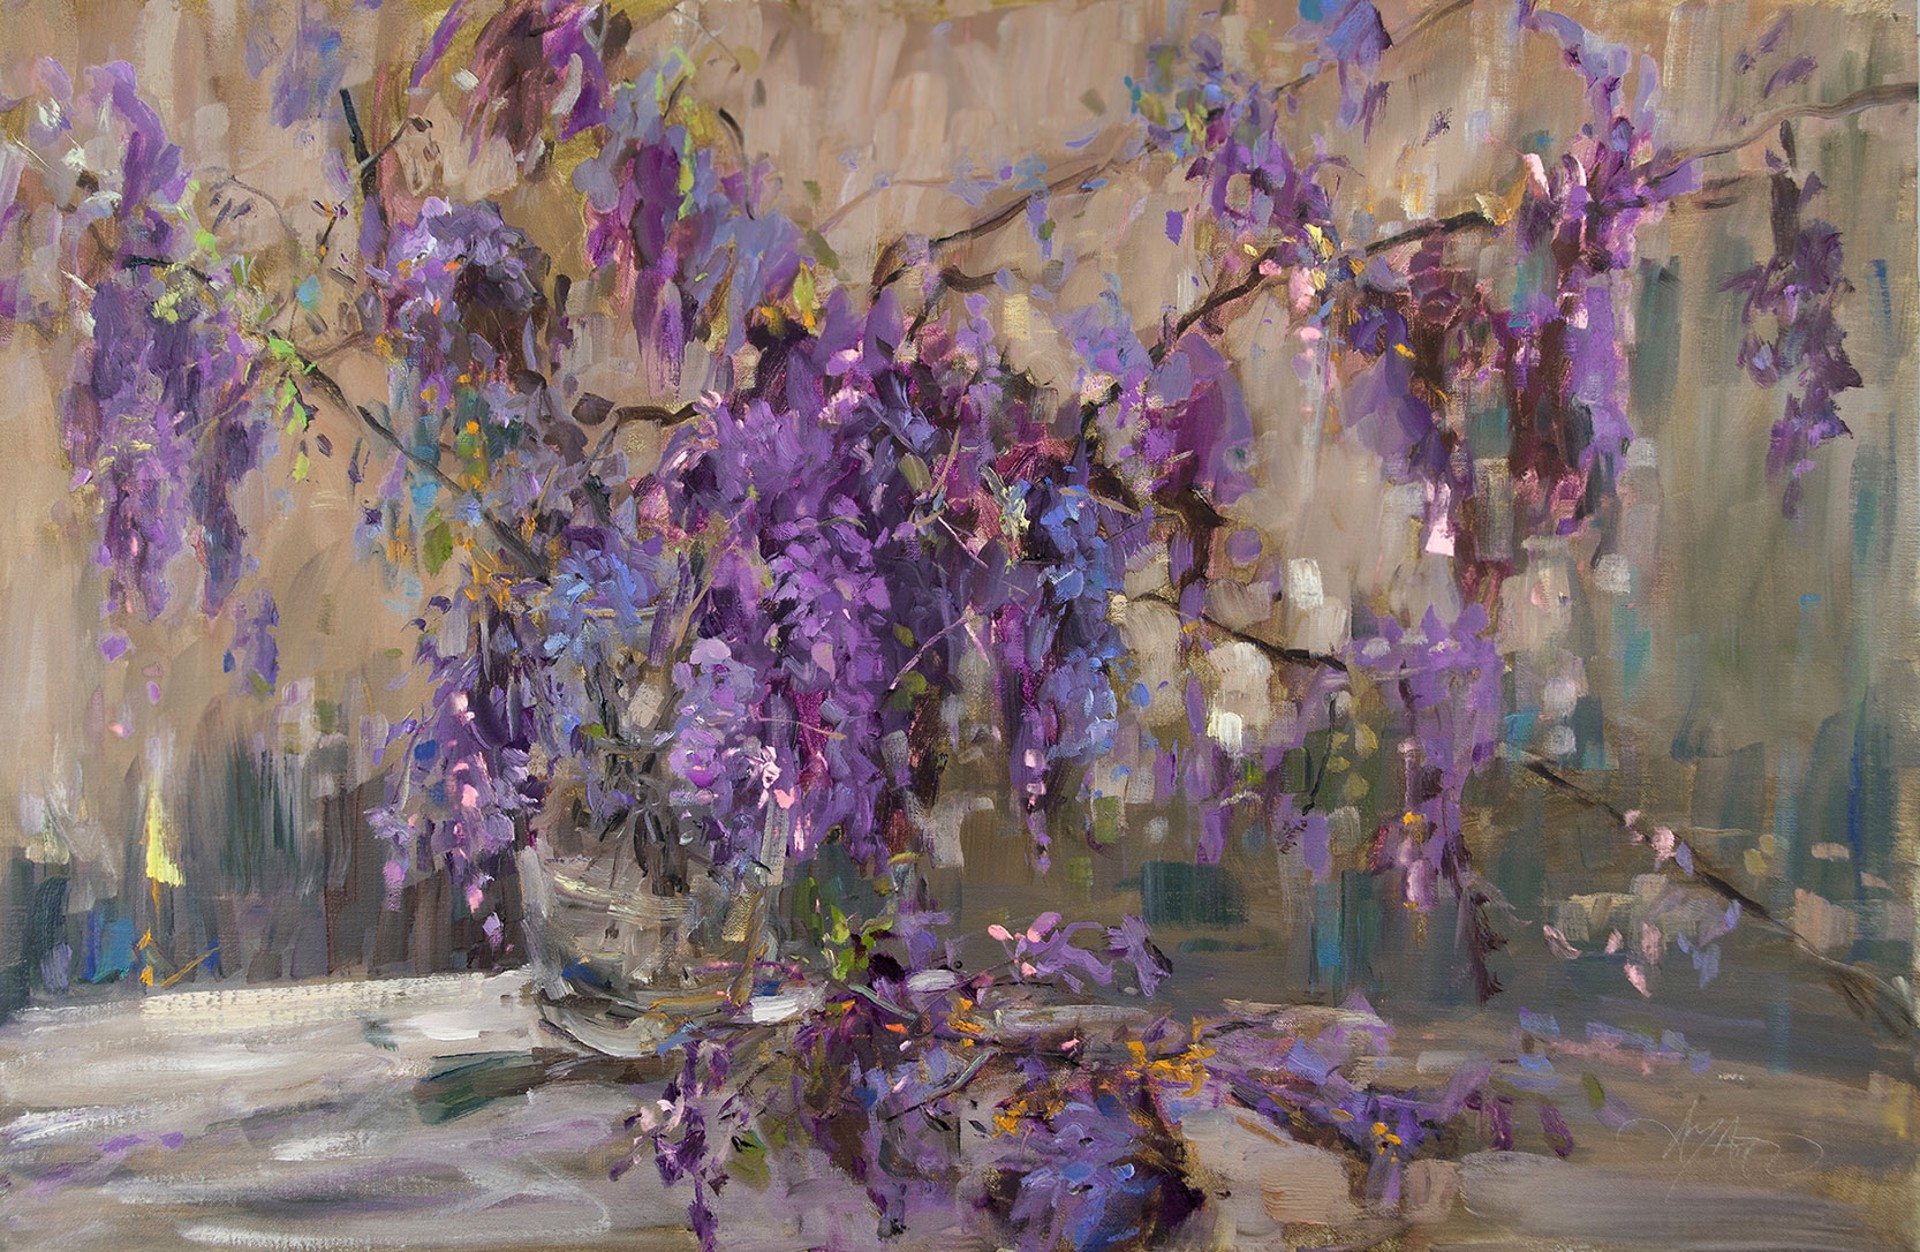 Stephanie Amato "Lavender Explosion" by Oil Painters of America